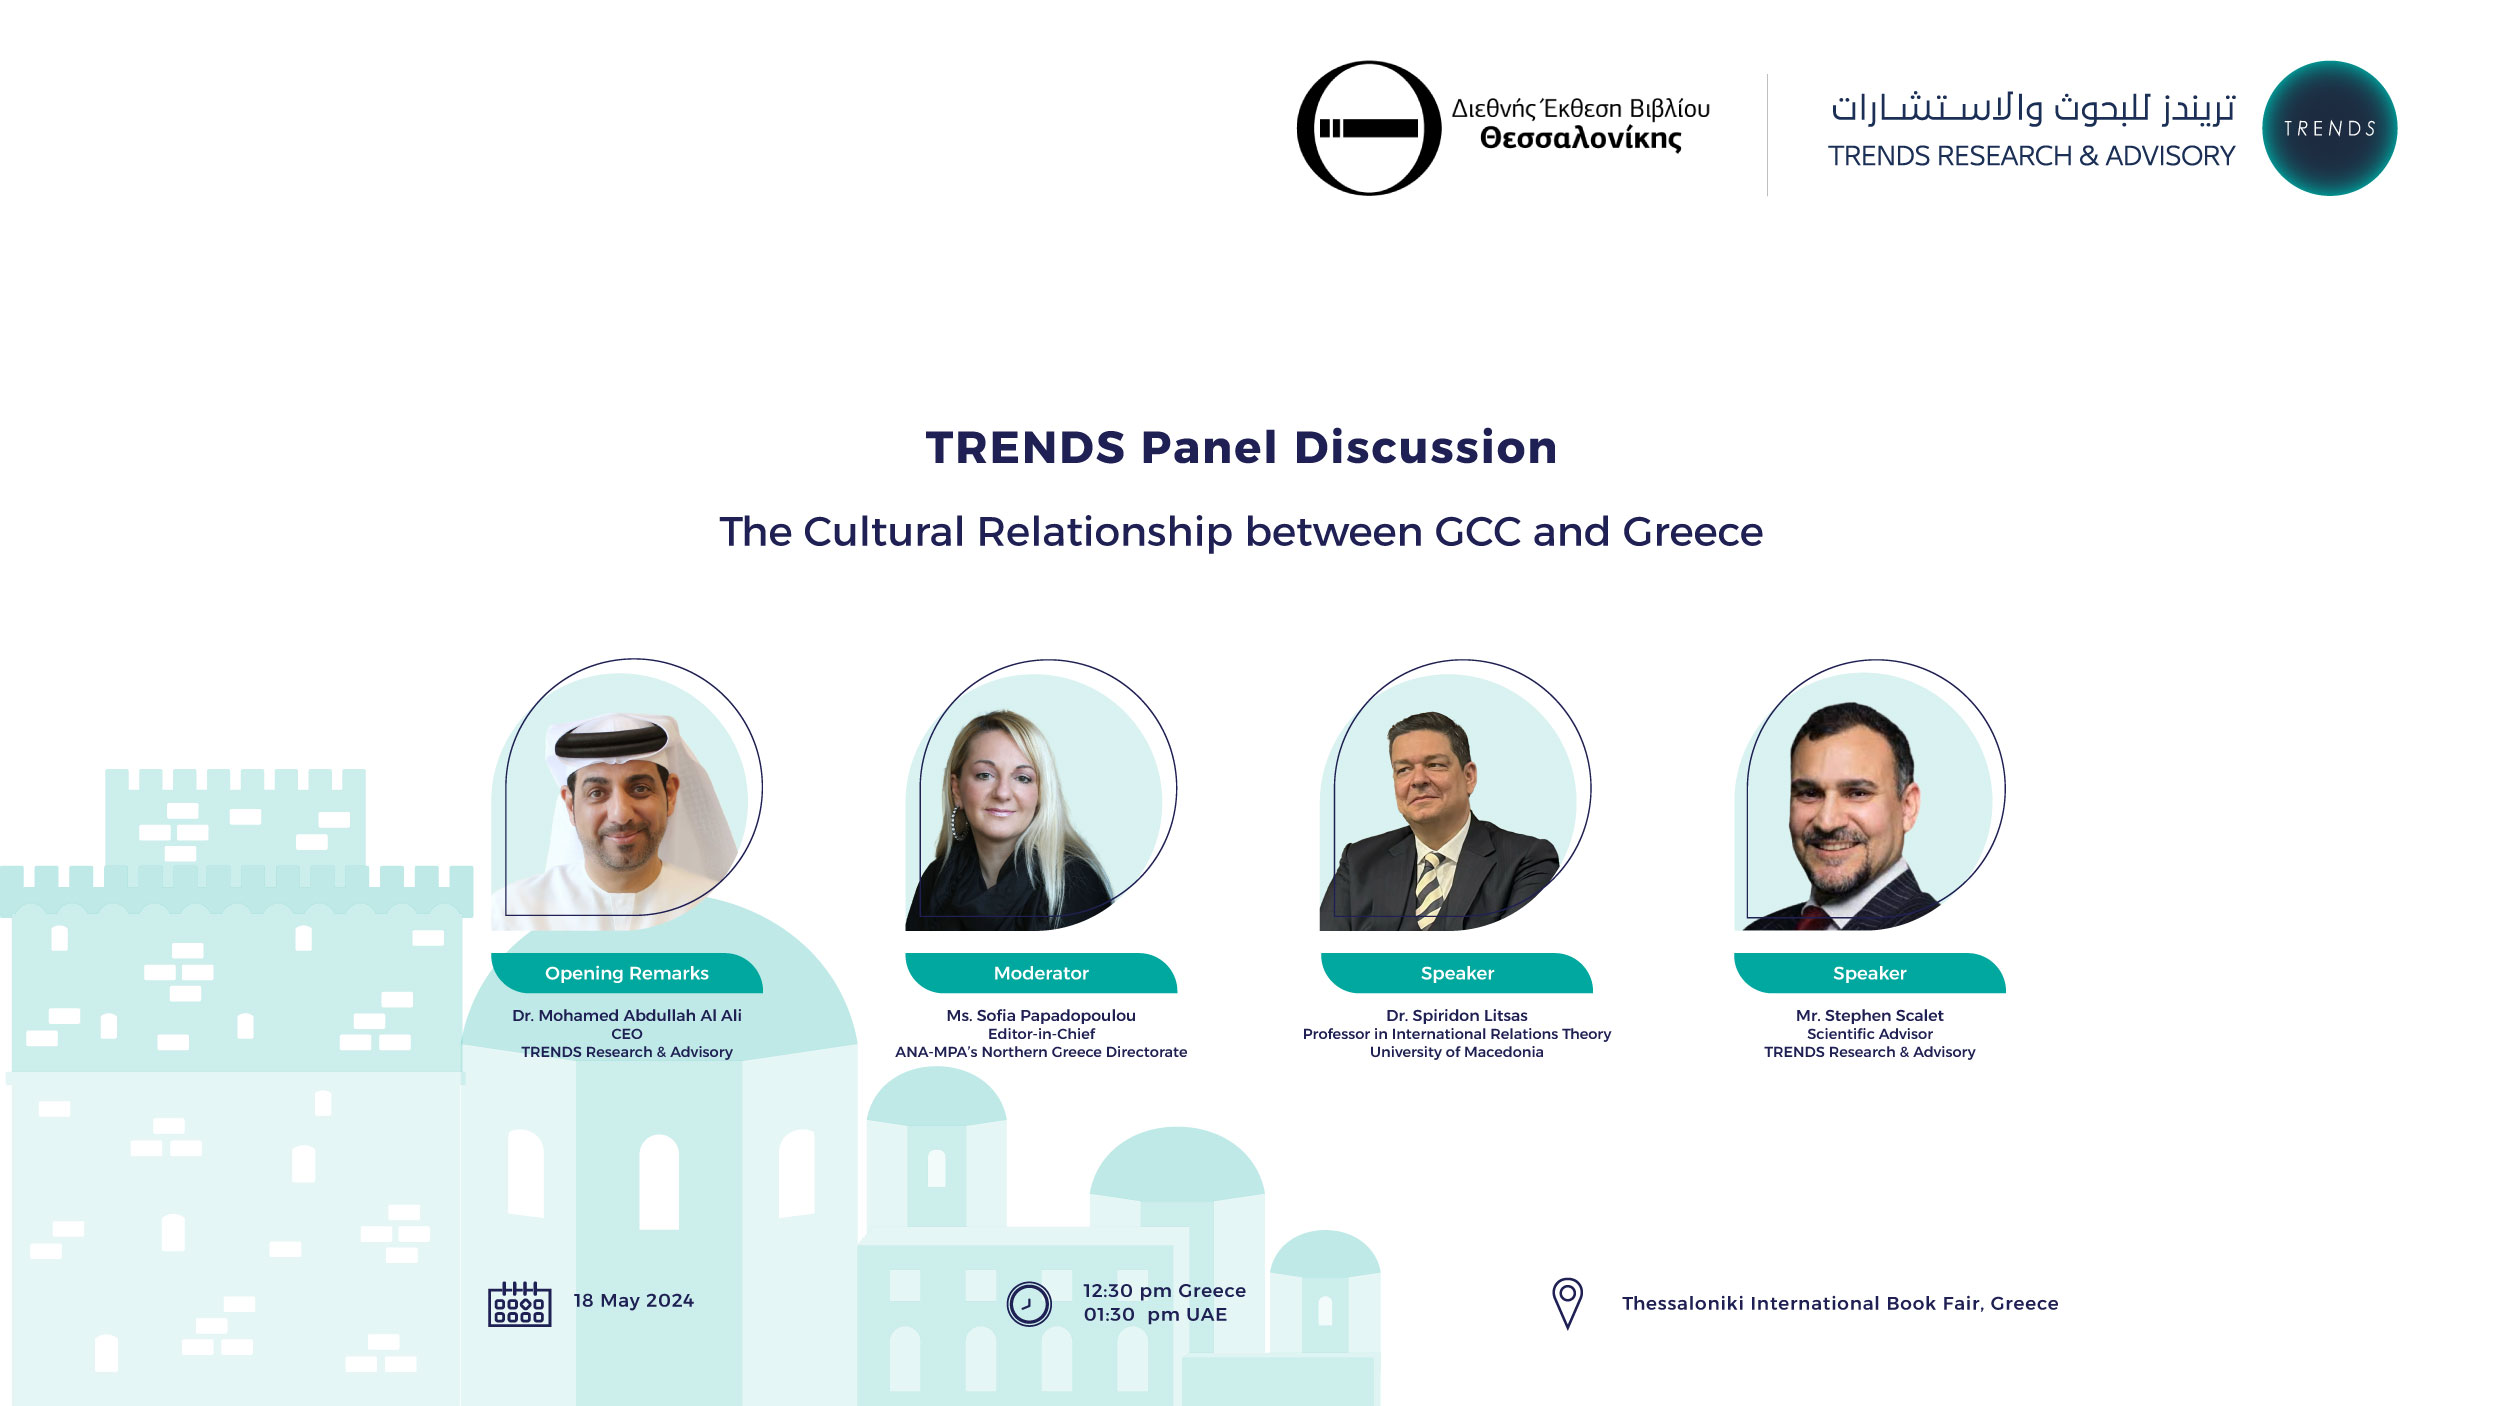 The Cultural Relationship between GCC and Greece